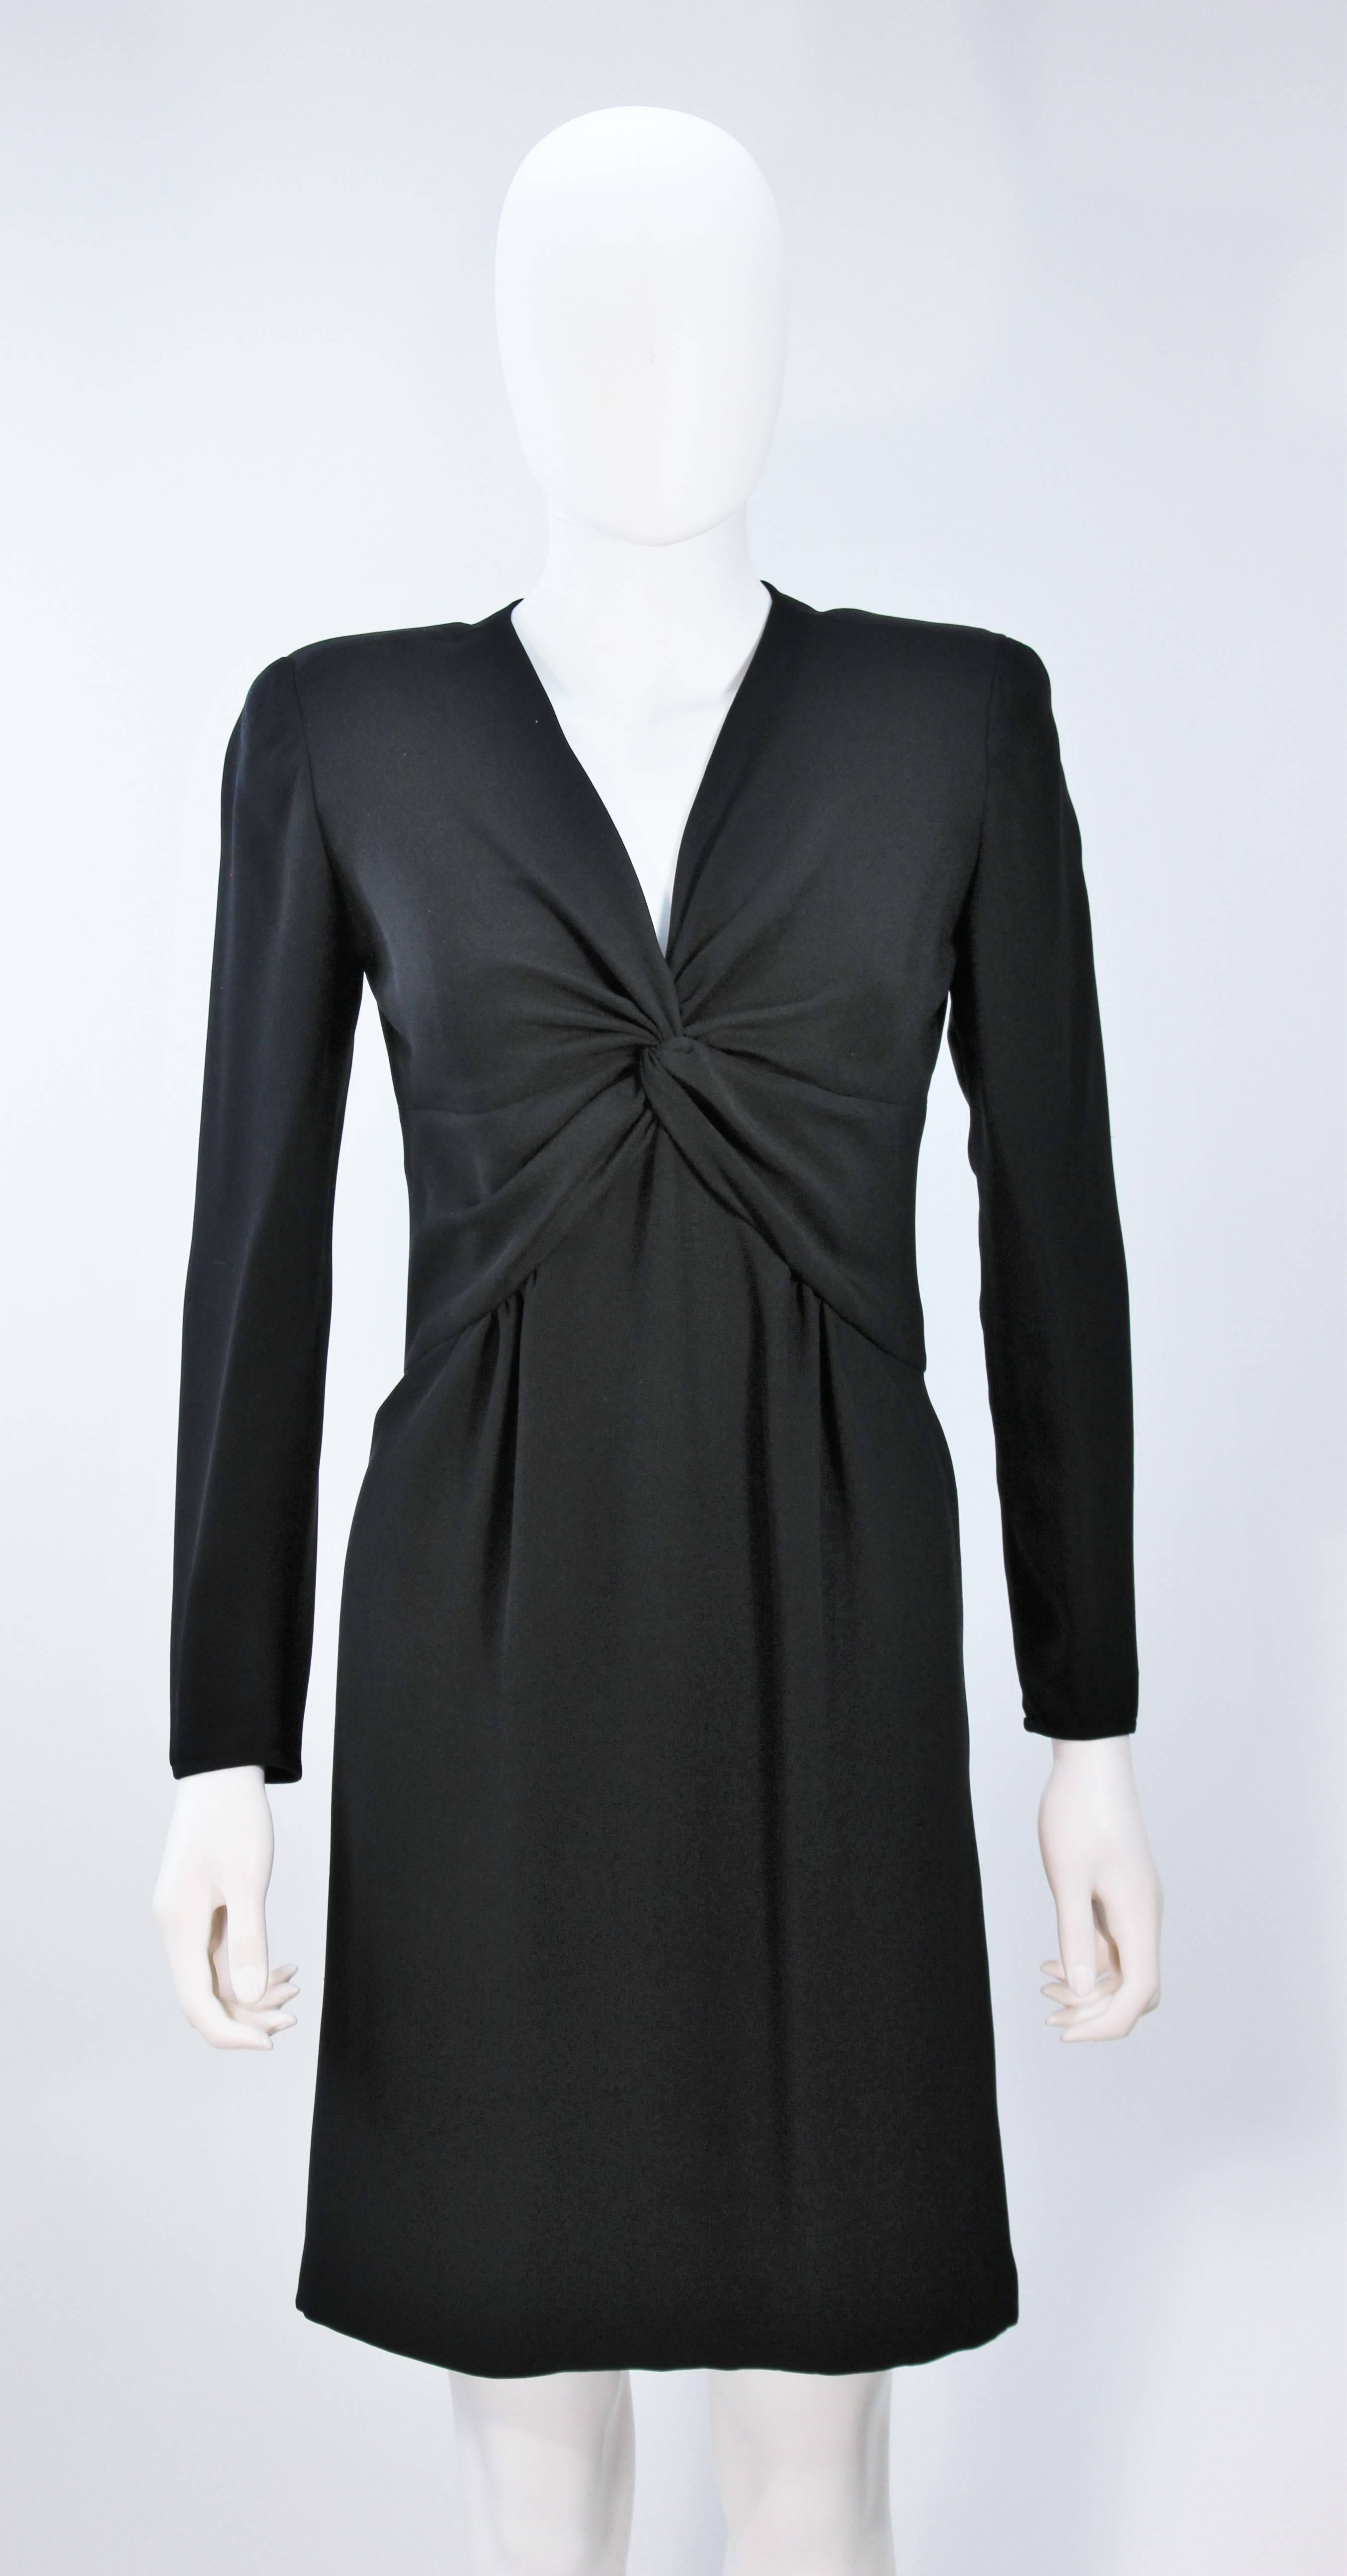 VALENTINO Black Twist Front Cocktail Dress Size 12 In Excellent Condition For Sale In Los Angeles, CA